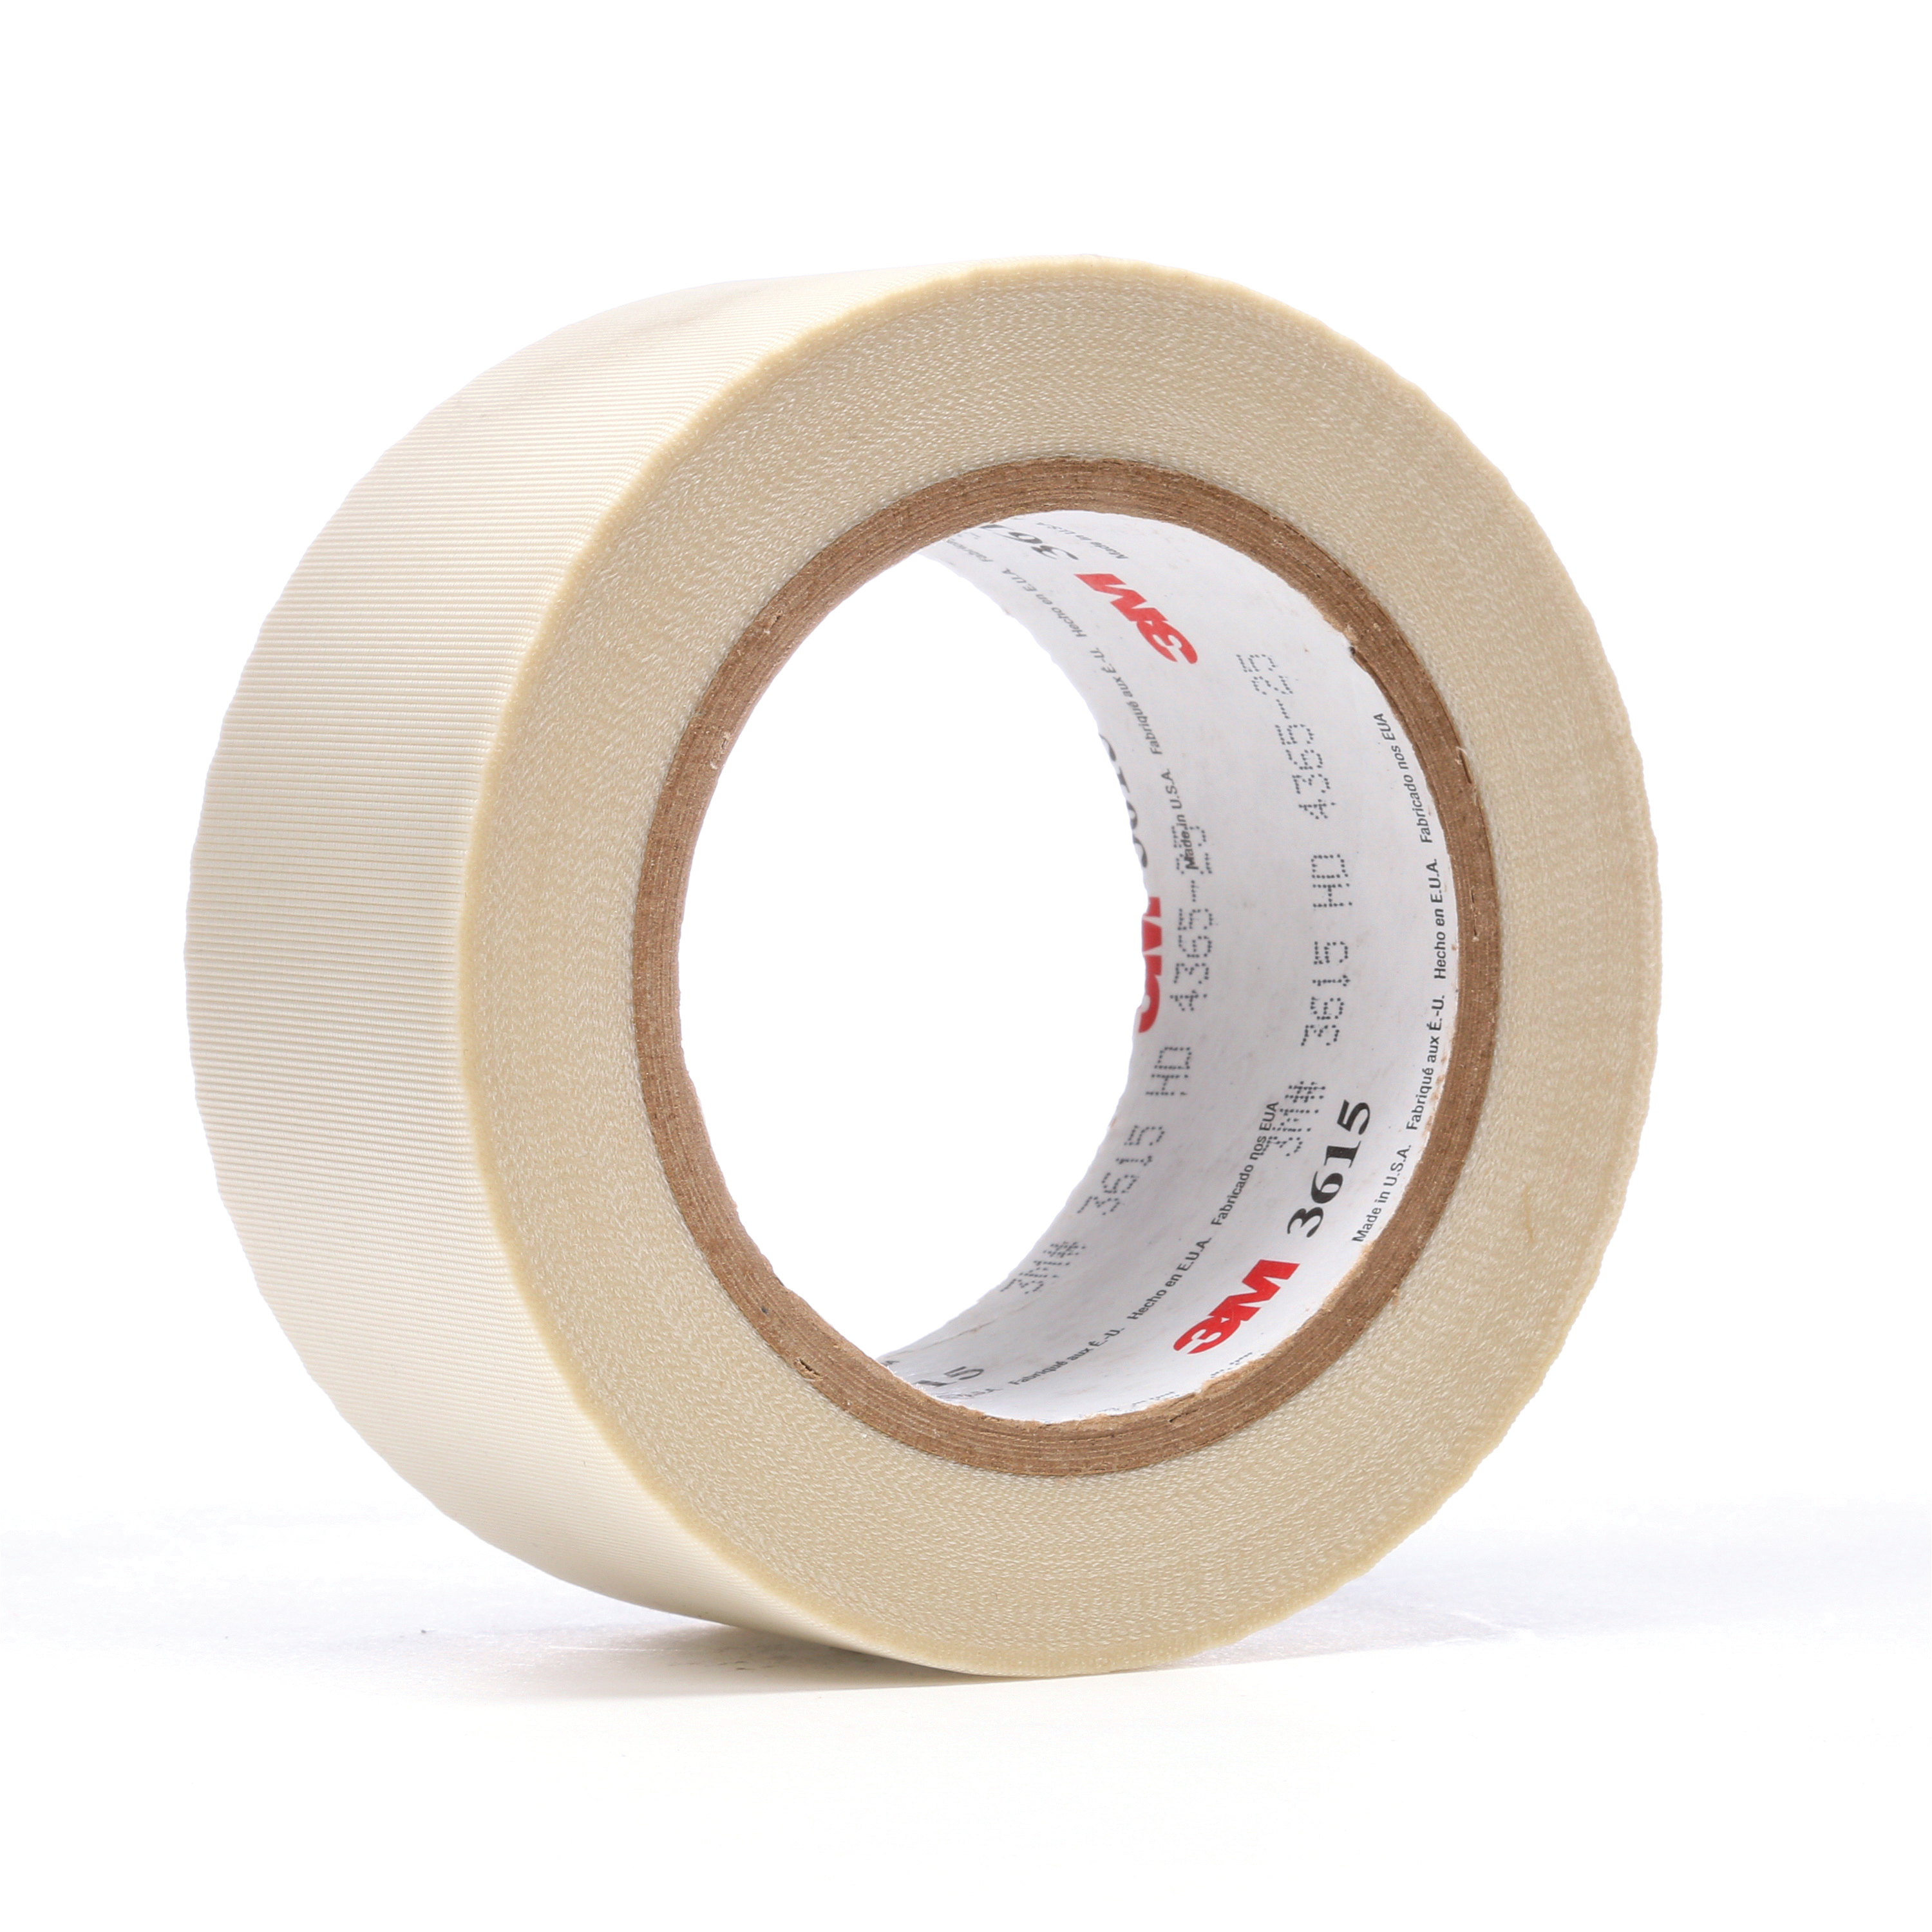 3M™ 021200-48236 Thick General Purpose Tape, 36 yd L x 2 in W, 7 mil THK, Silicon Adhesive, Glass Cloth Backing, White